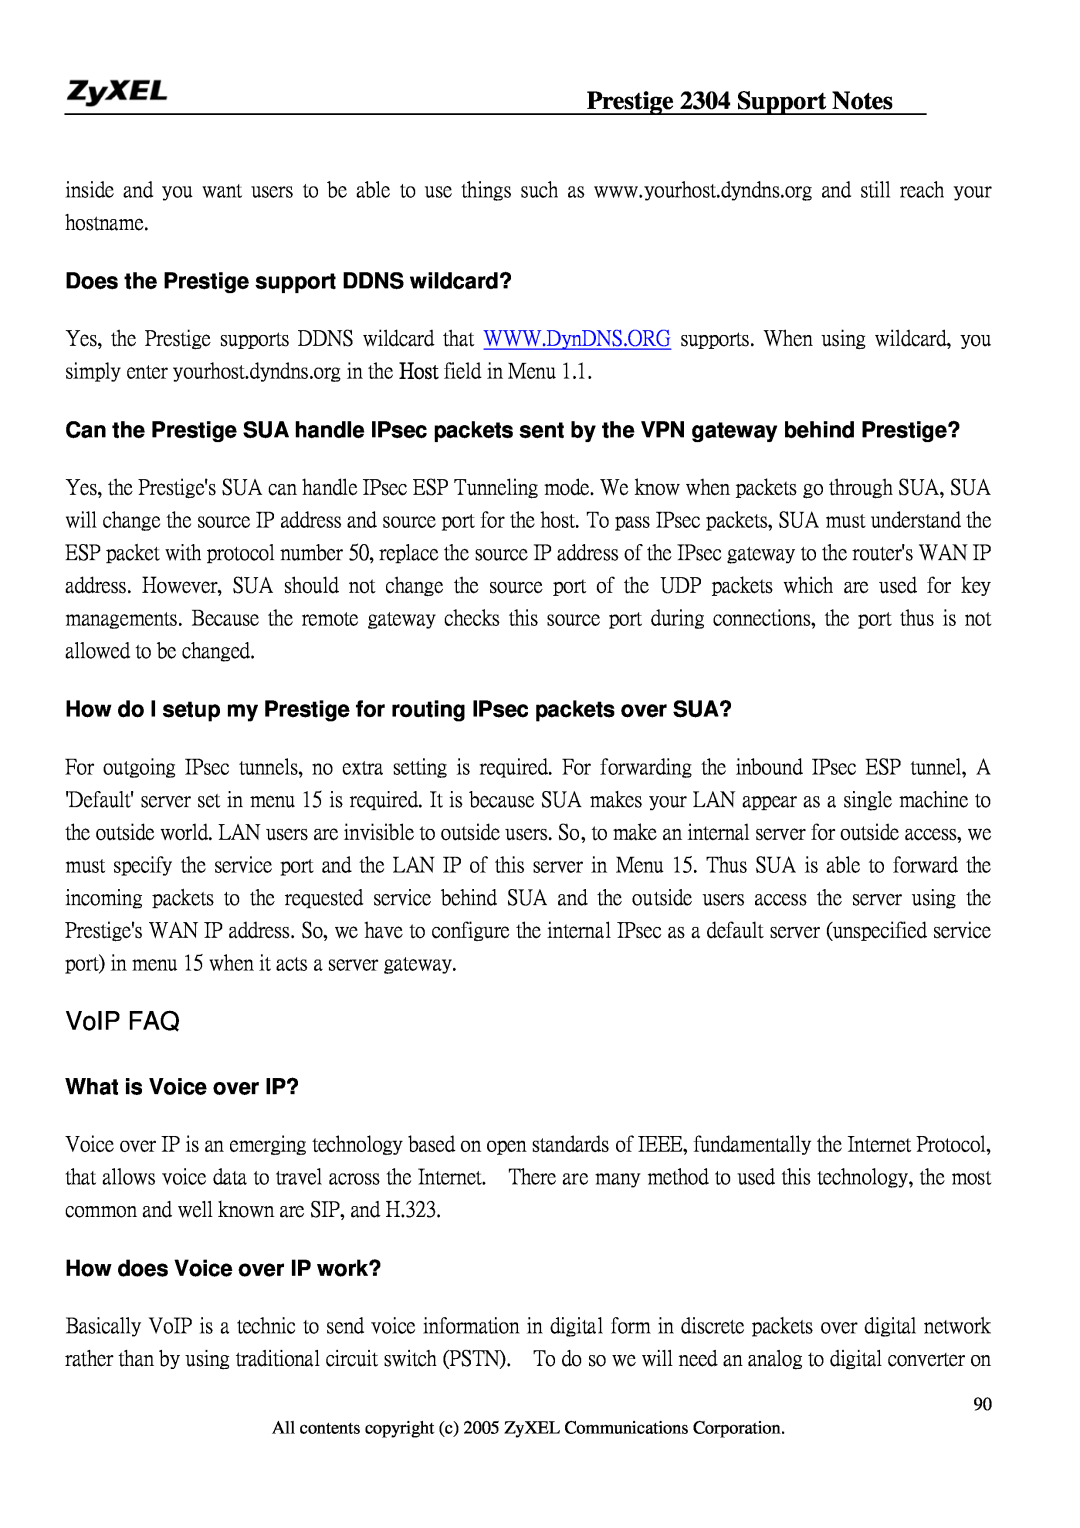 ZyXEL Communications 2304R-P1 manual VoIP FAQ, Does the Prestige support DDNS wildcard?, What is Voice over IP? 